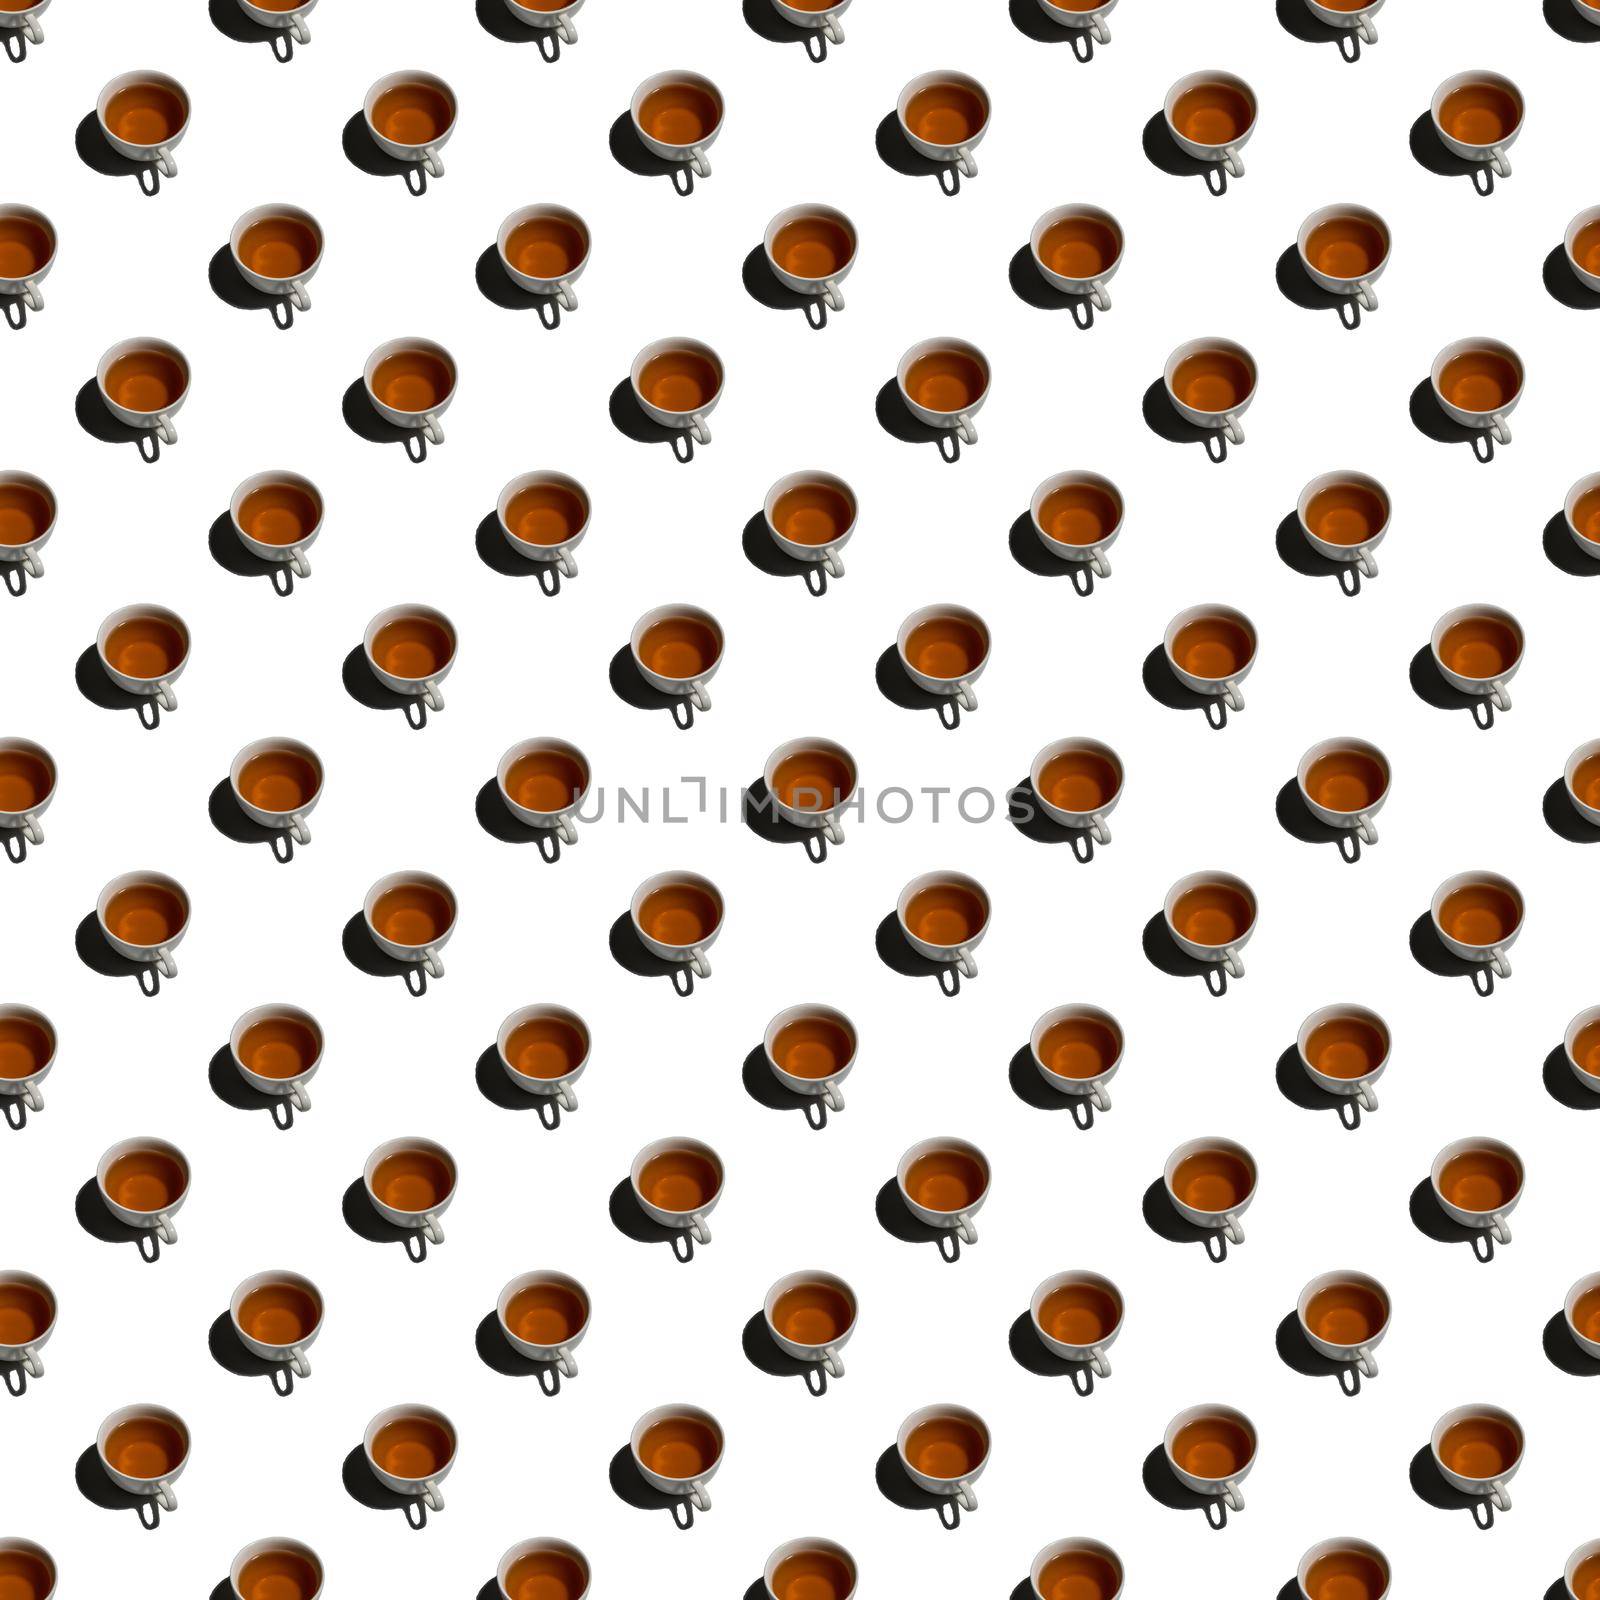 Pattern with many tea cups on white background.